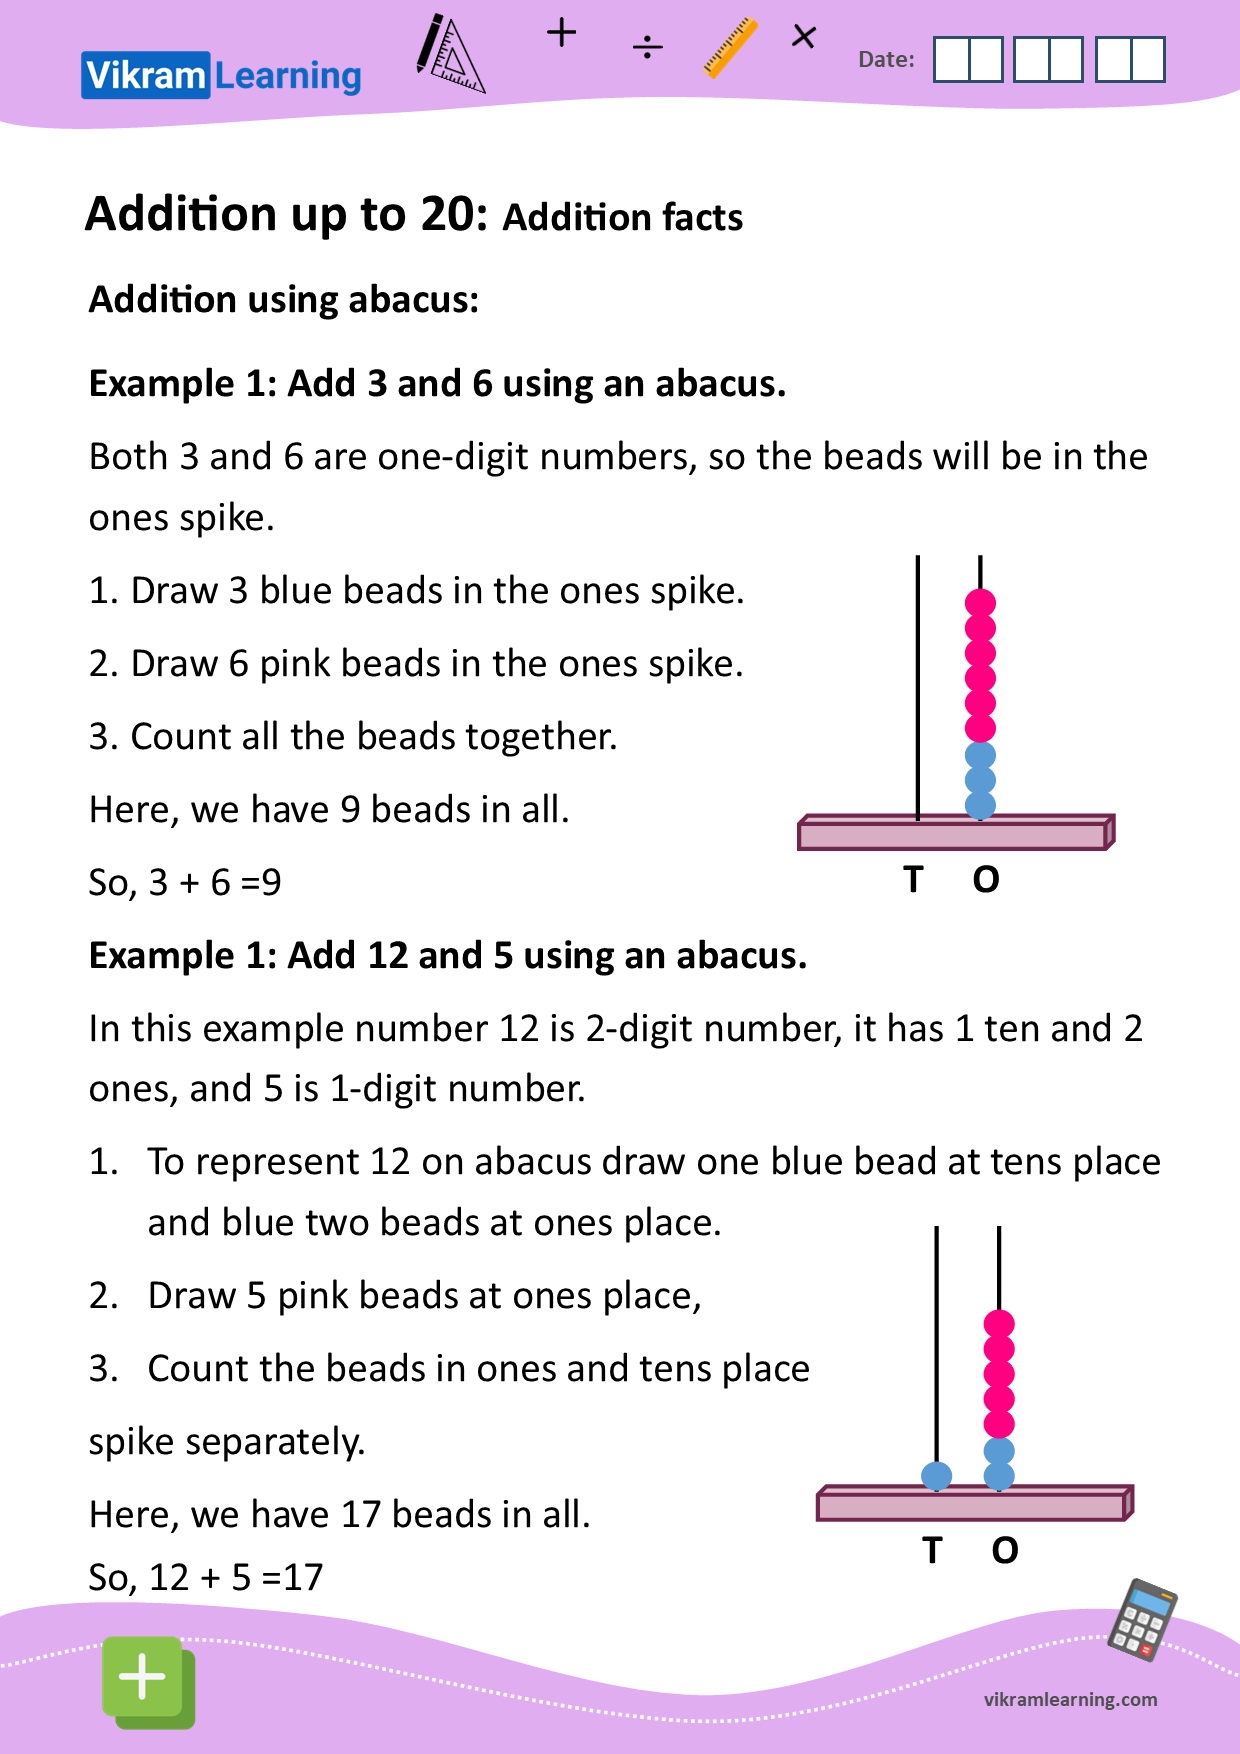 Download addition up to 20 using abacus worksheets